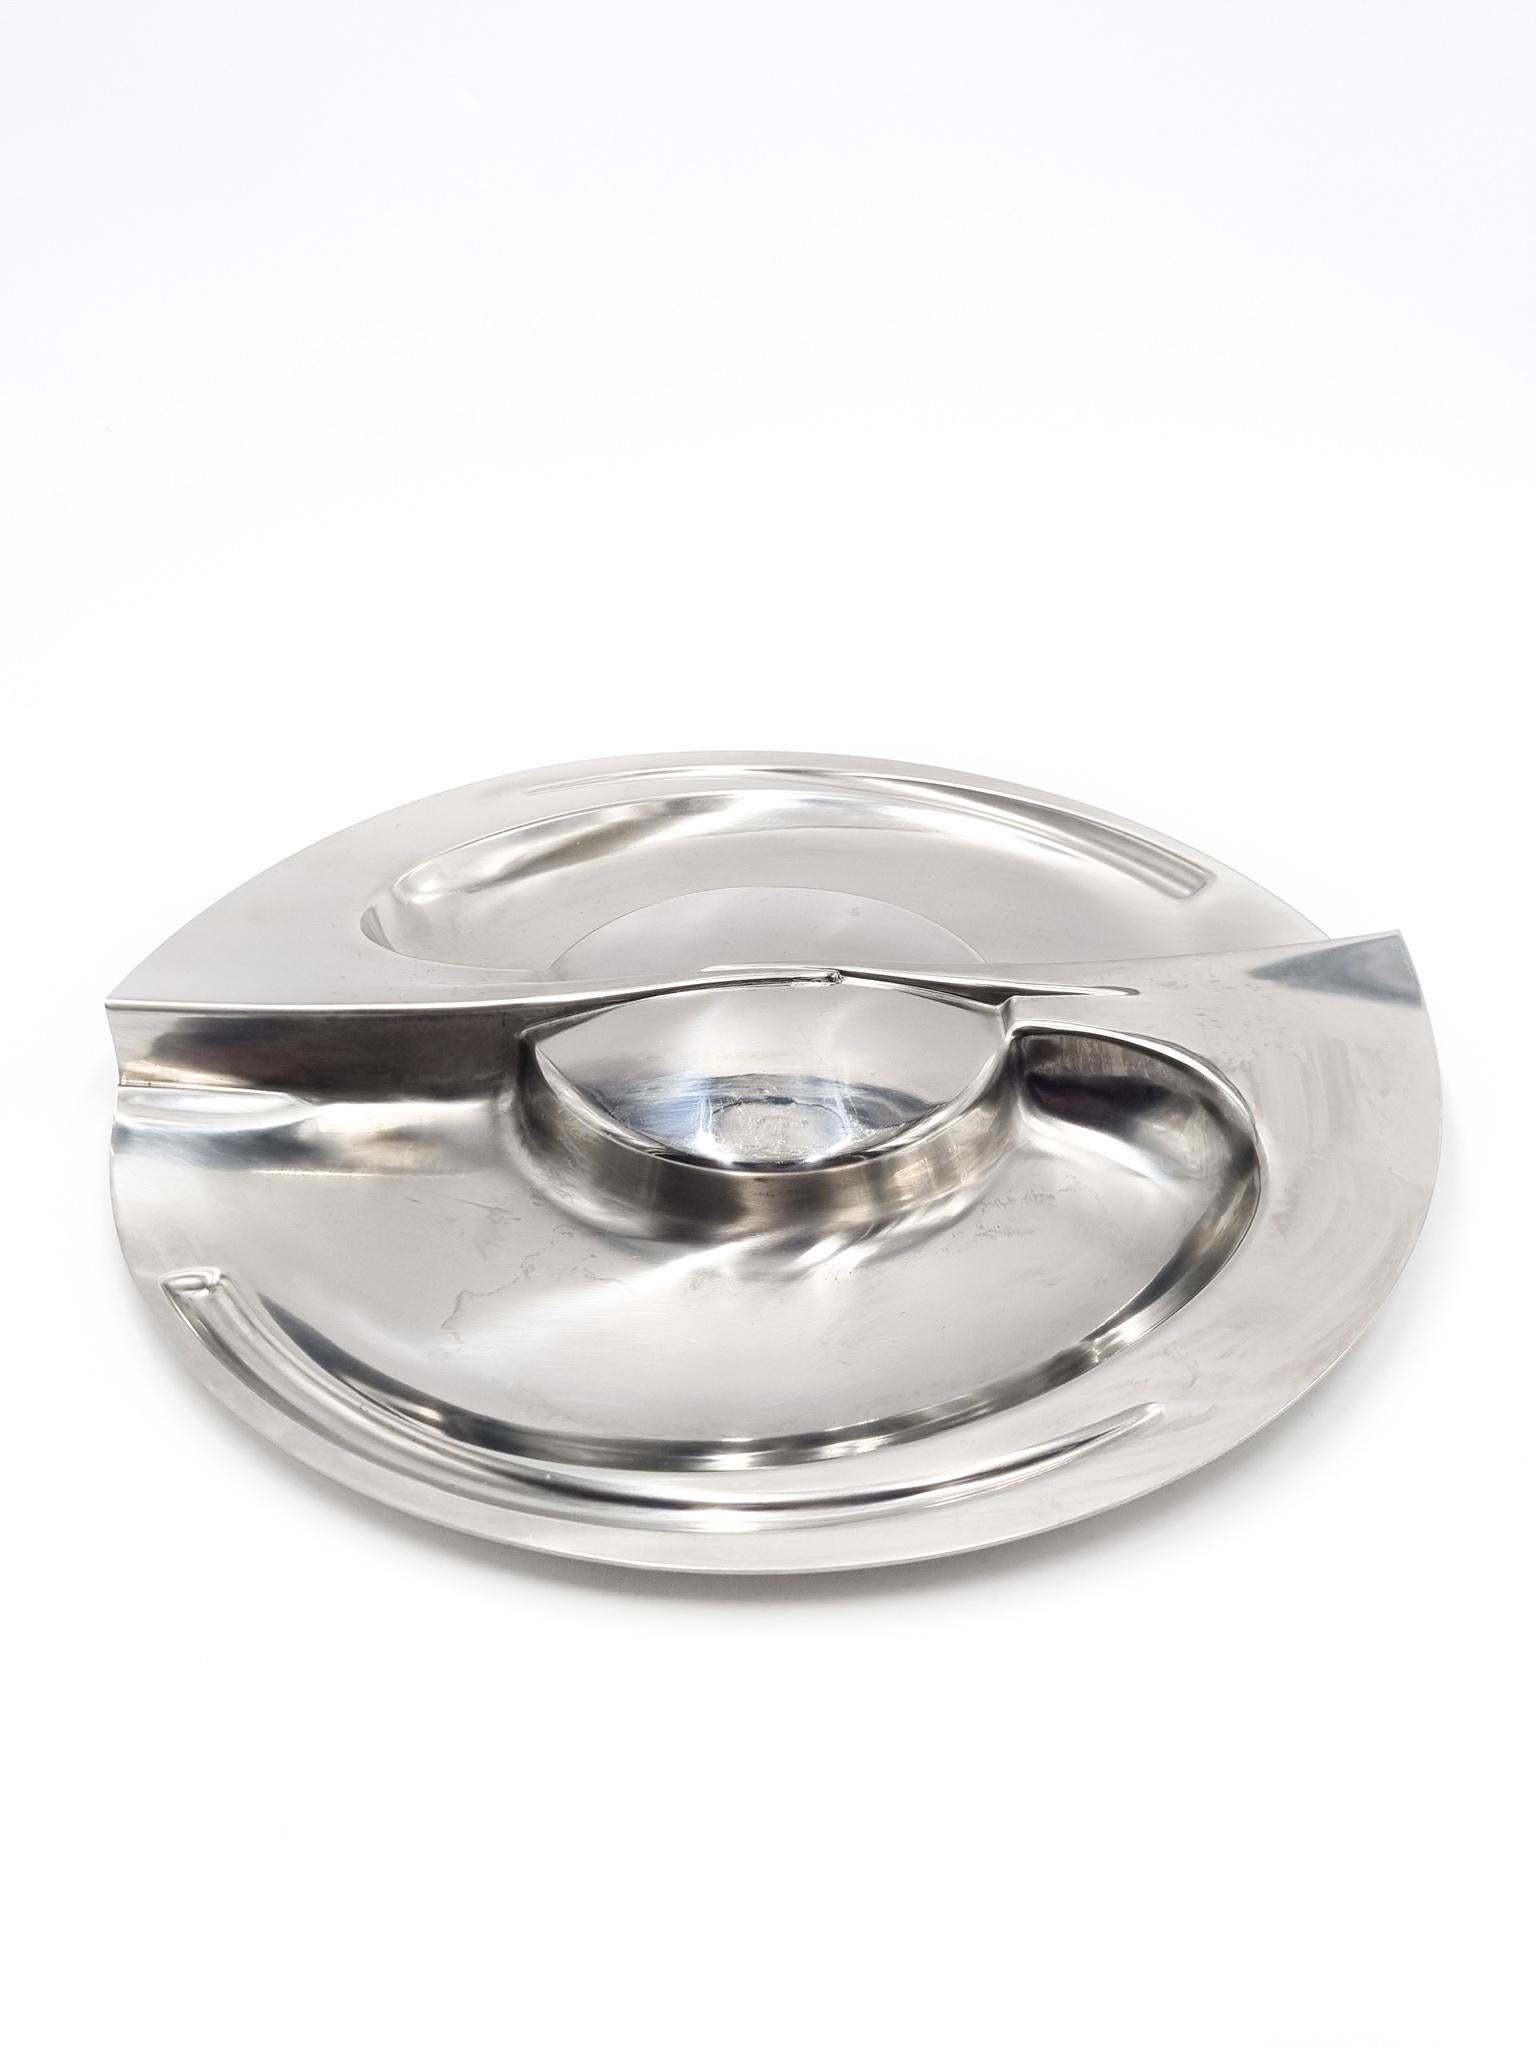 Mid-Century Modern Centerpiece Plate in Steel by Carmelo Cappello for Alessi D'apres 1980s